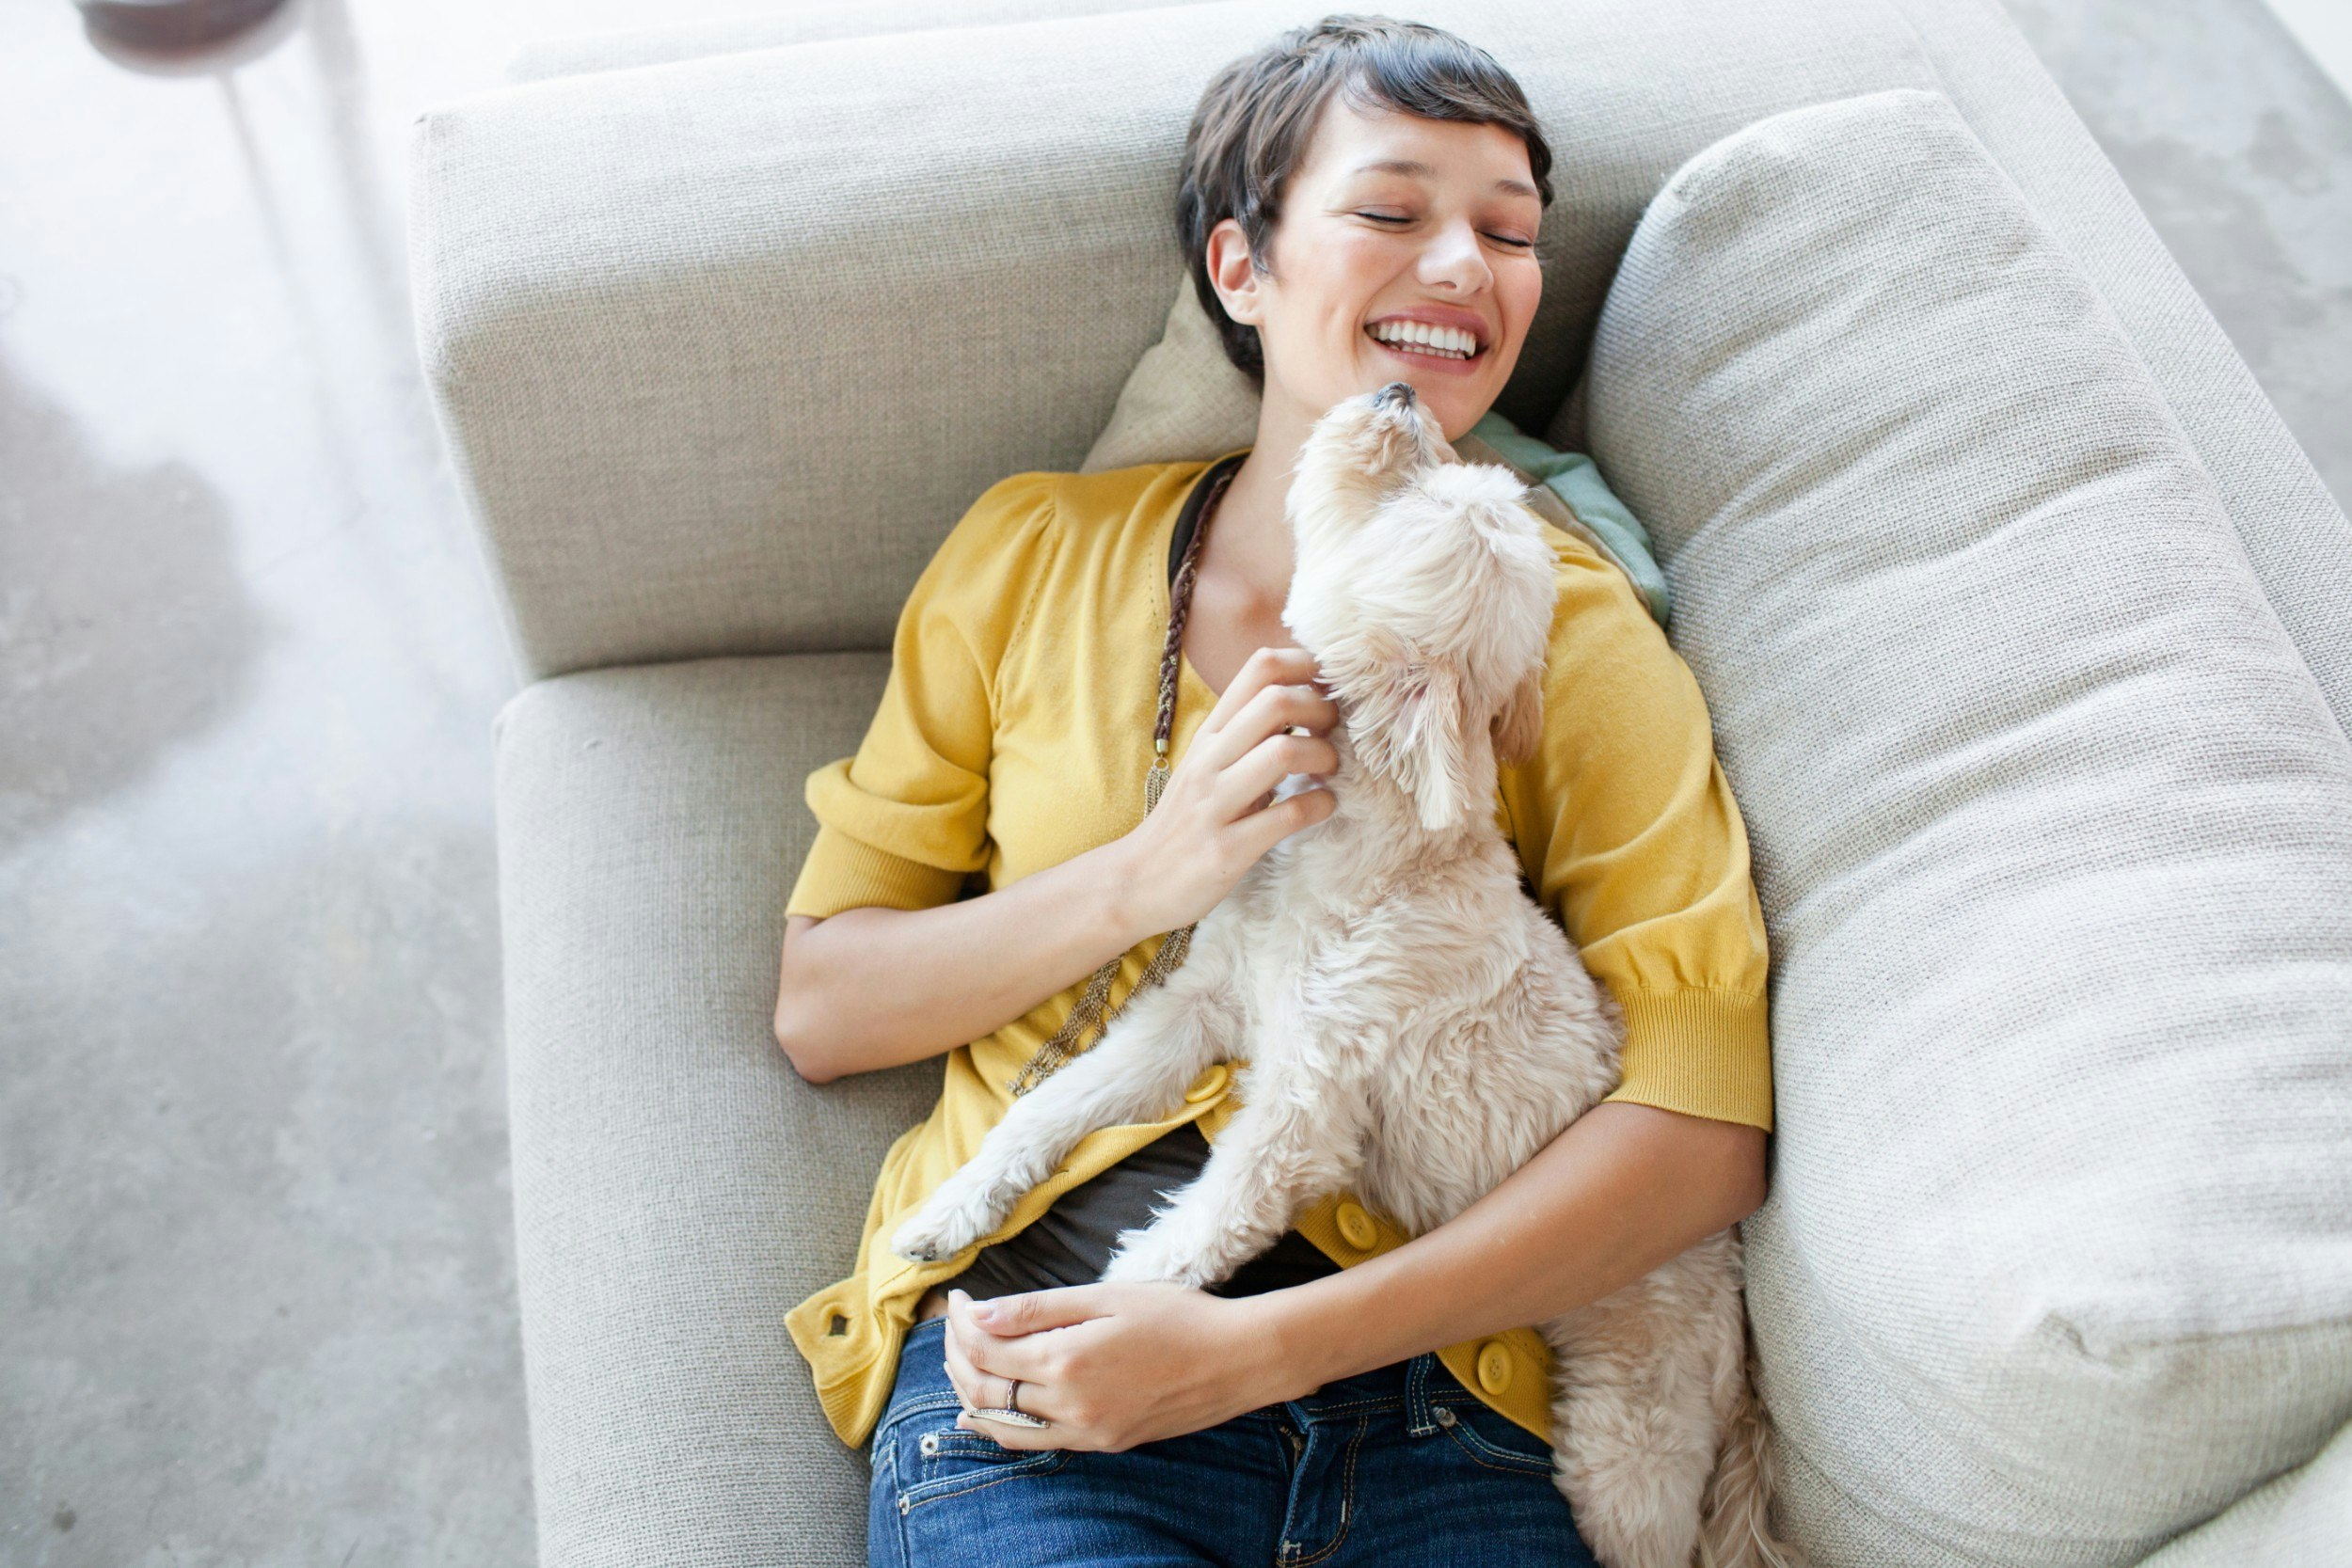 A woman lying on a sofa playing with her dog